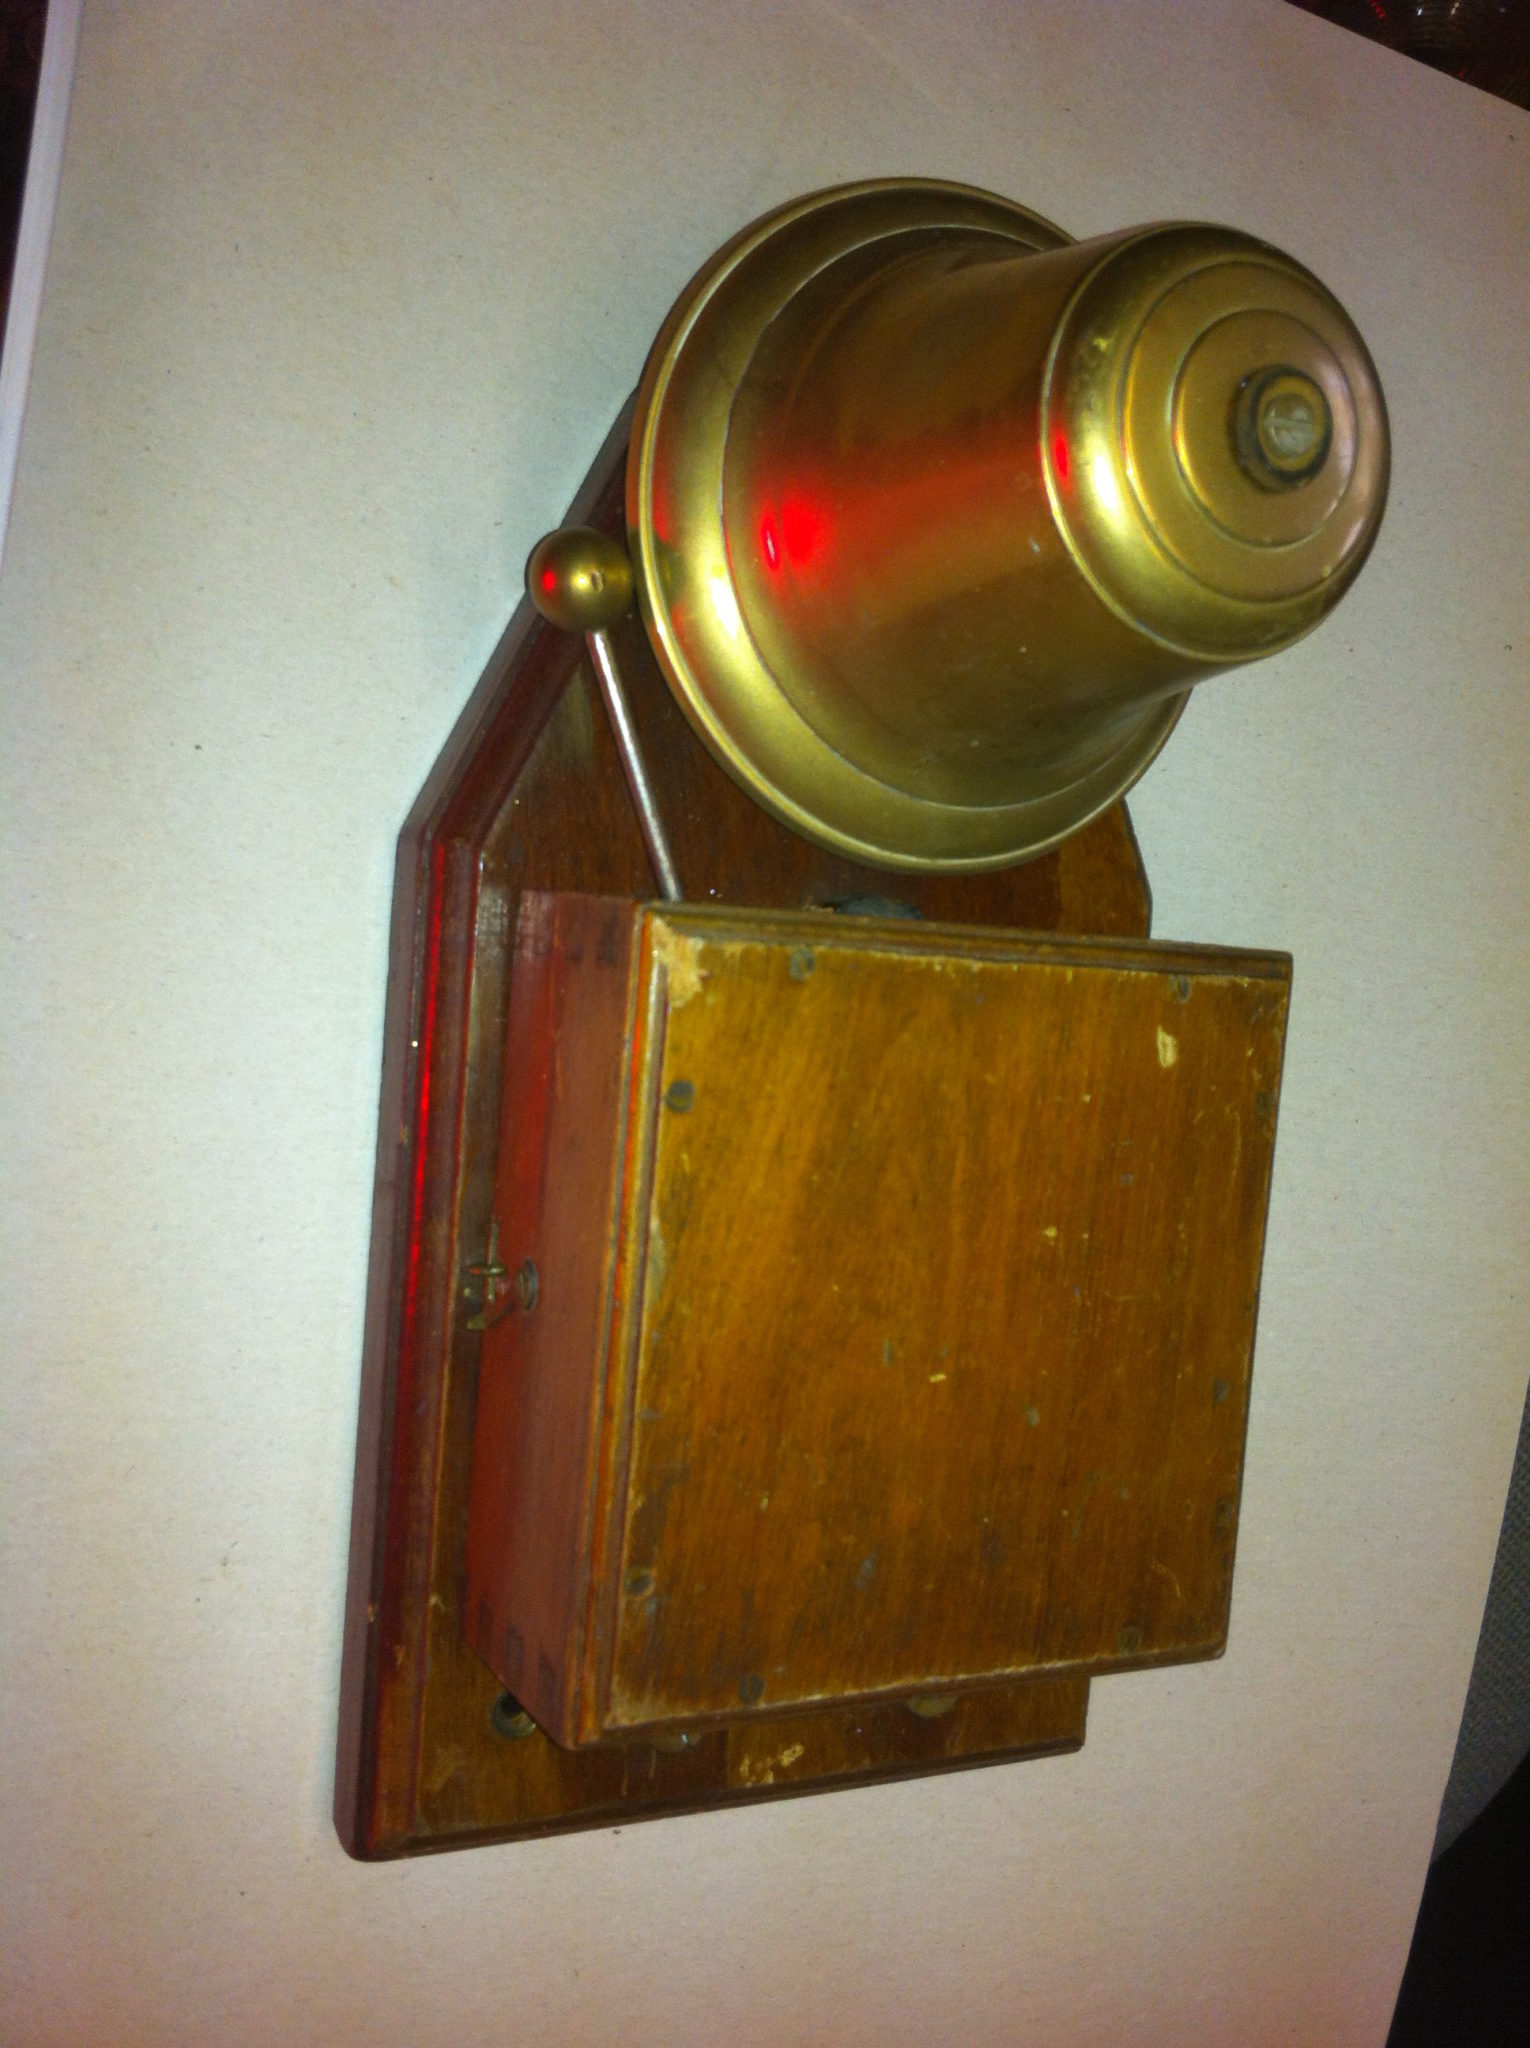 Fire Alarm - Old Single Bell